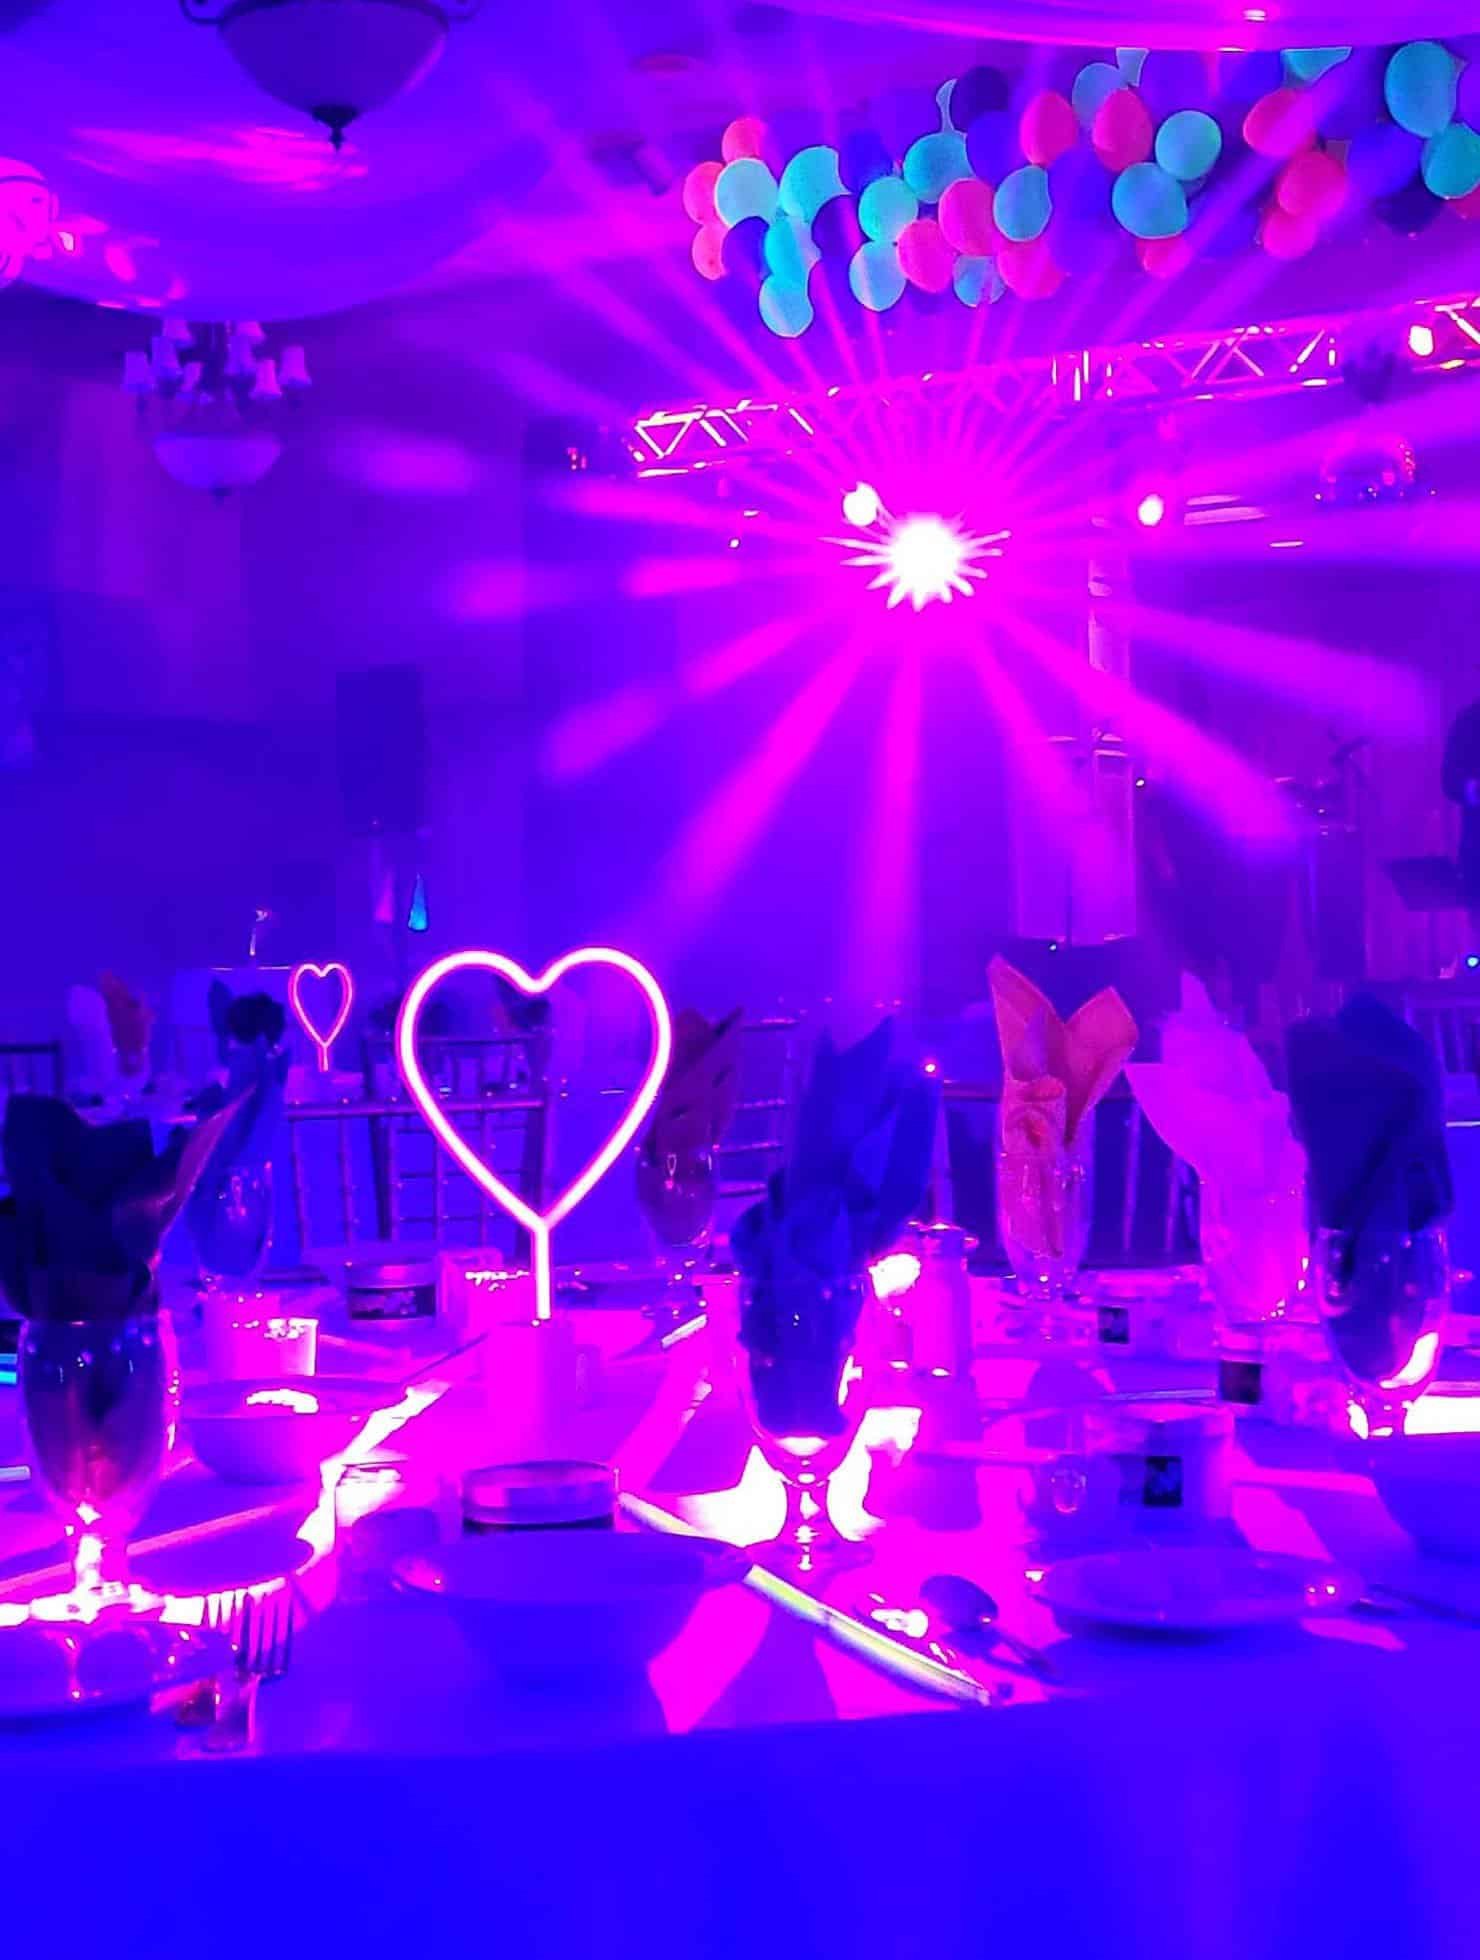 https://shipour.wedding/wp-content/uploads/2017/11/uv_party_lights_picture.jpg